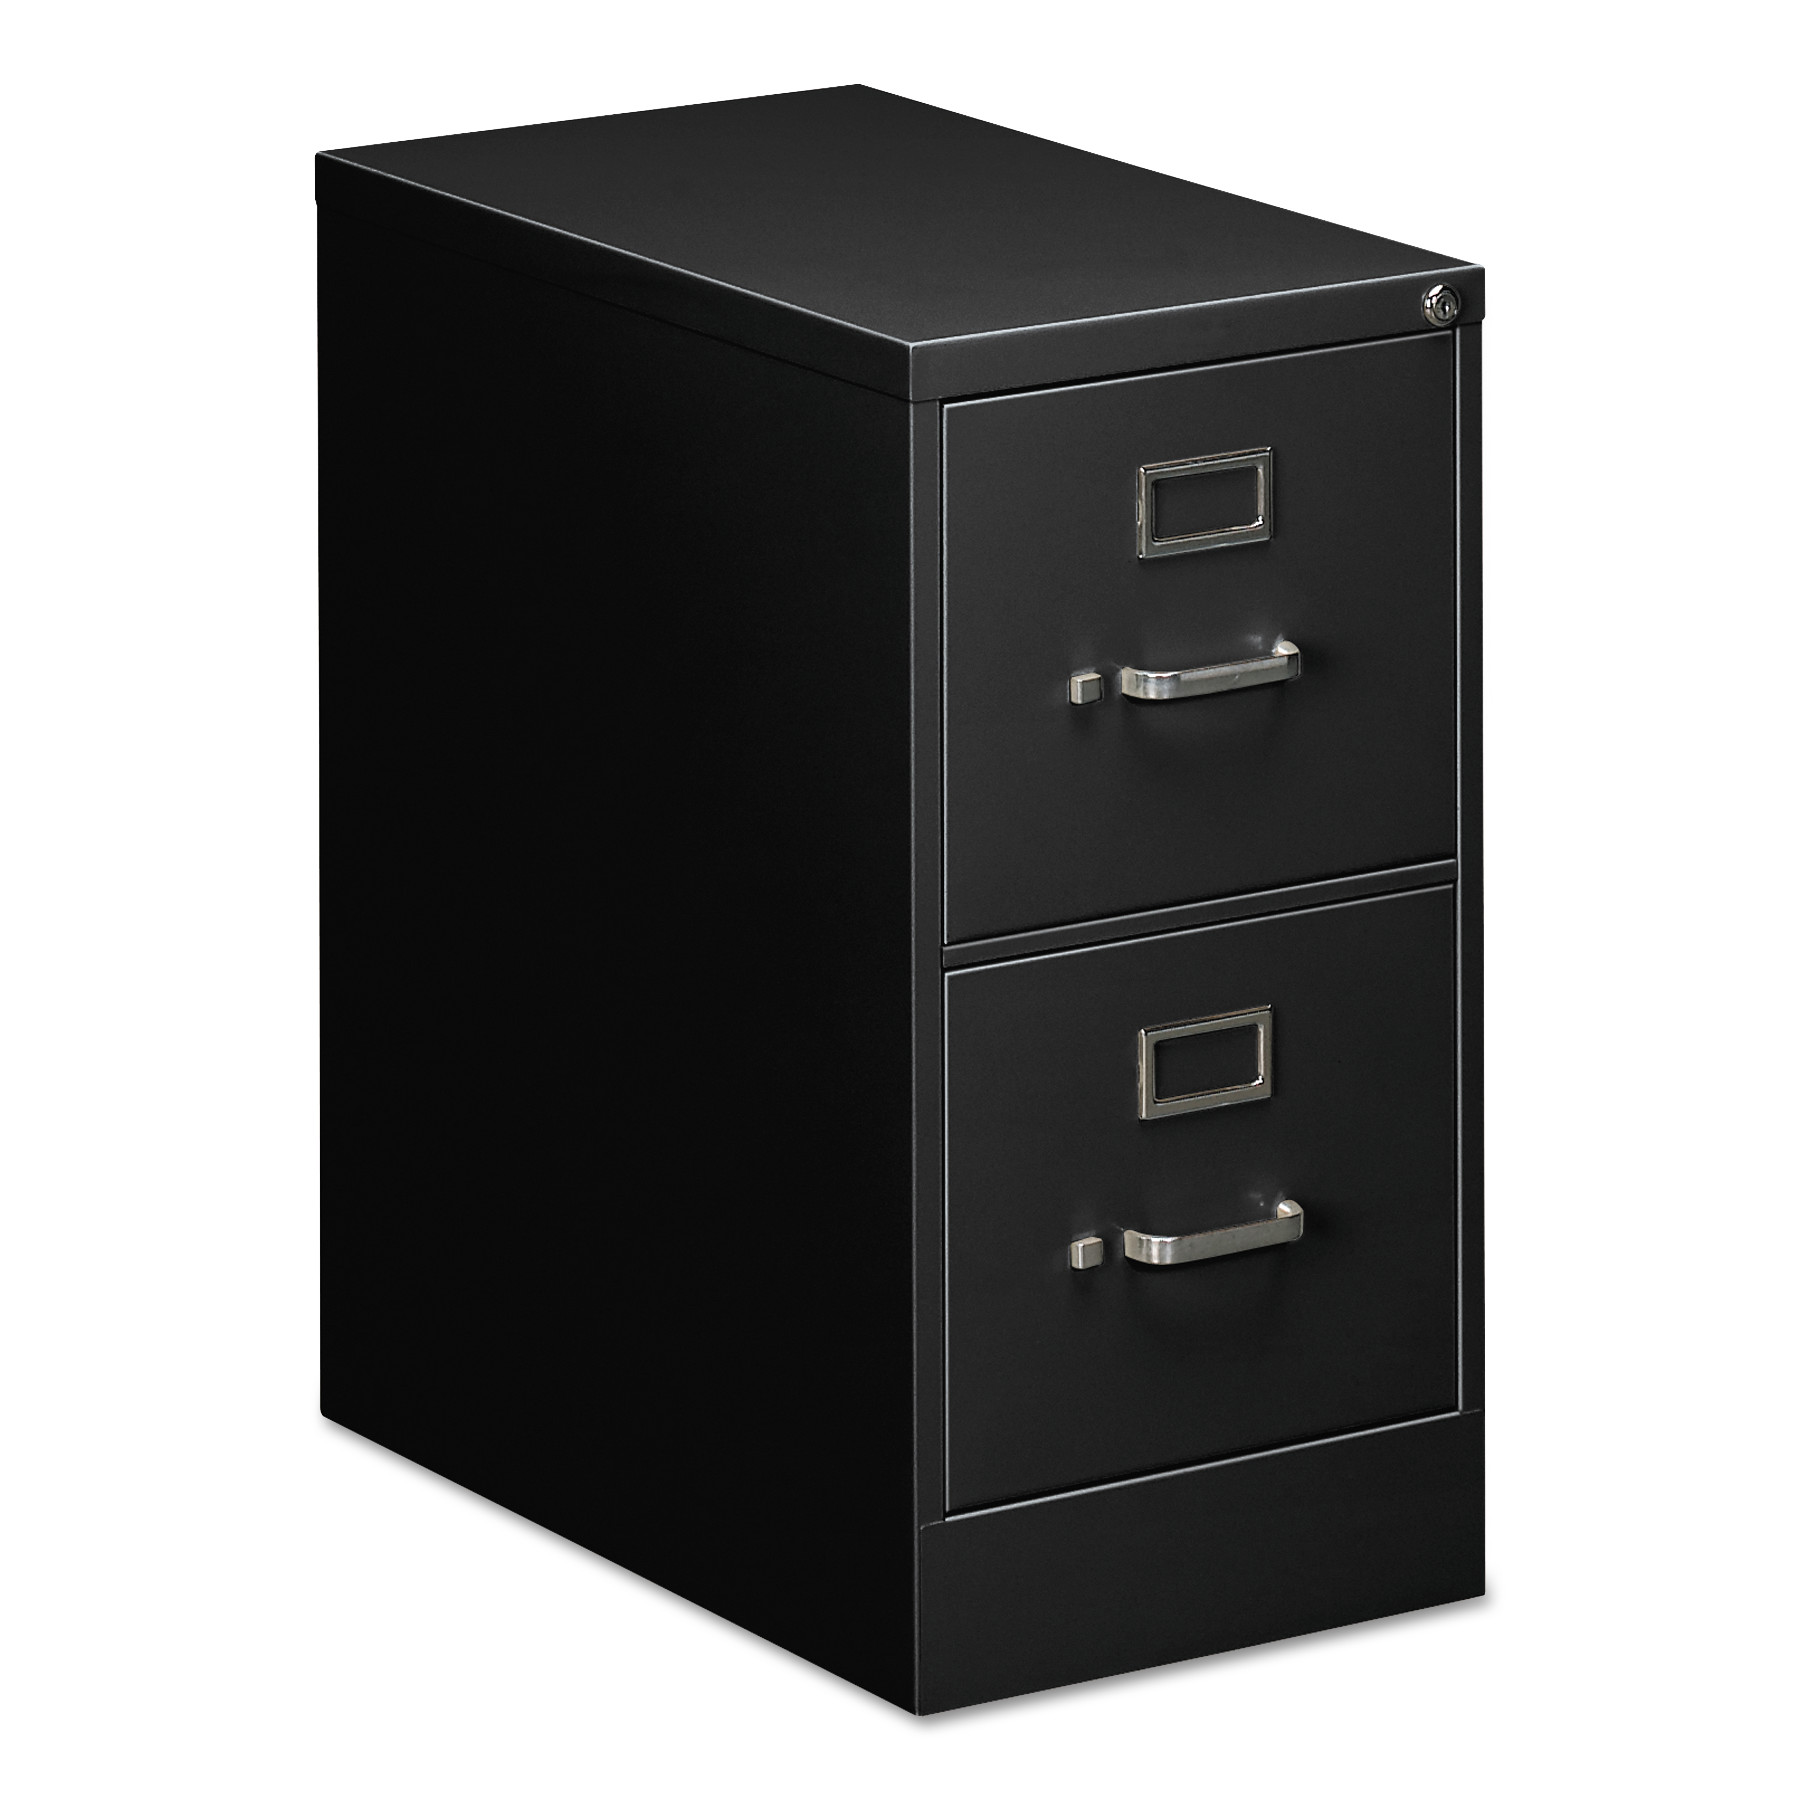 Two-Drawer Economy Vertical File, Letter, 15w x 26 1/2d x 29h, Black